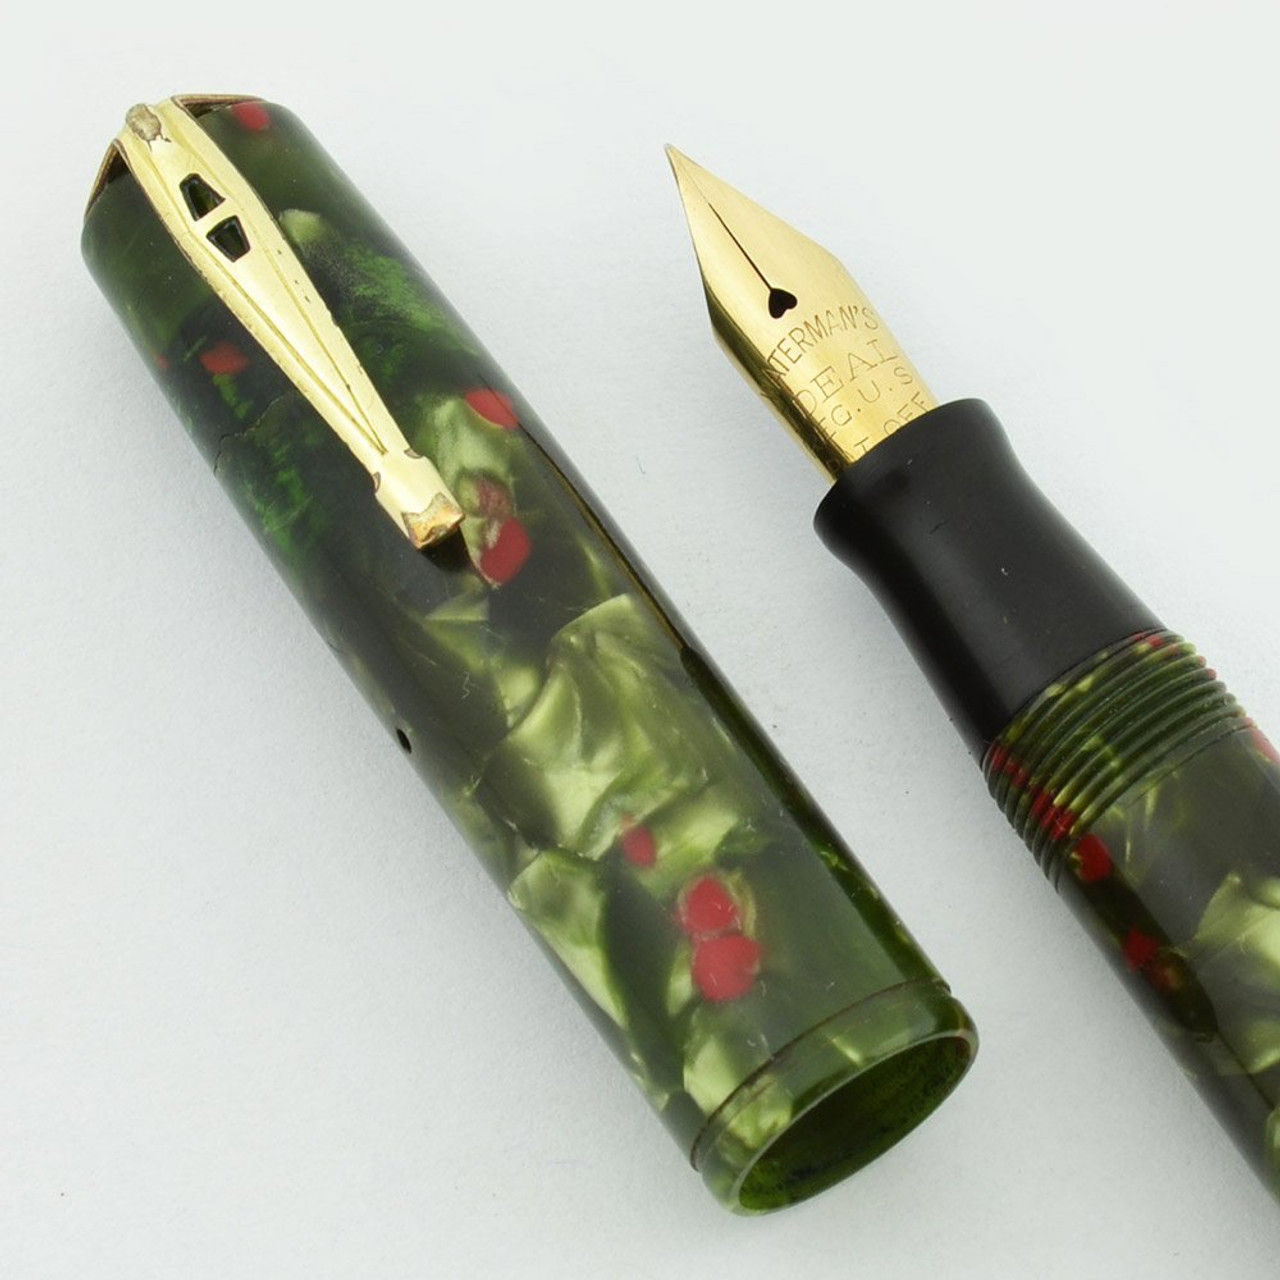 Waterman 92V Fountain Pen - Green and Red Marble, Fine Flexible Nib (Very Nice, Restored)